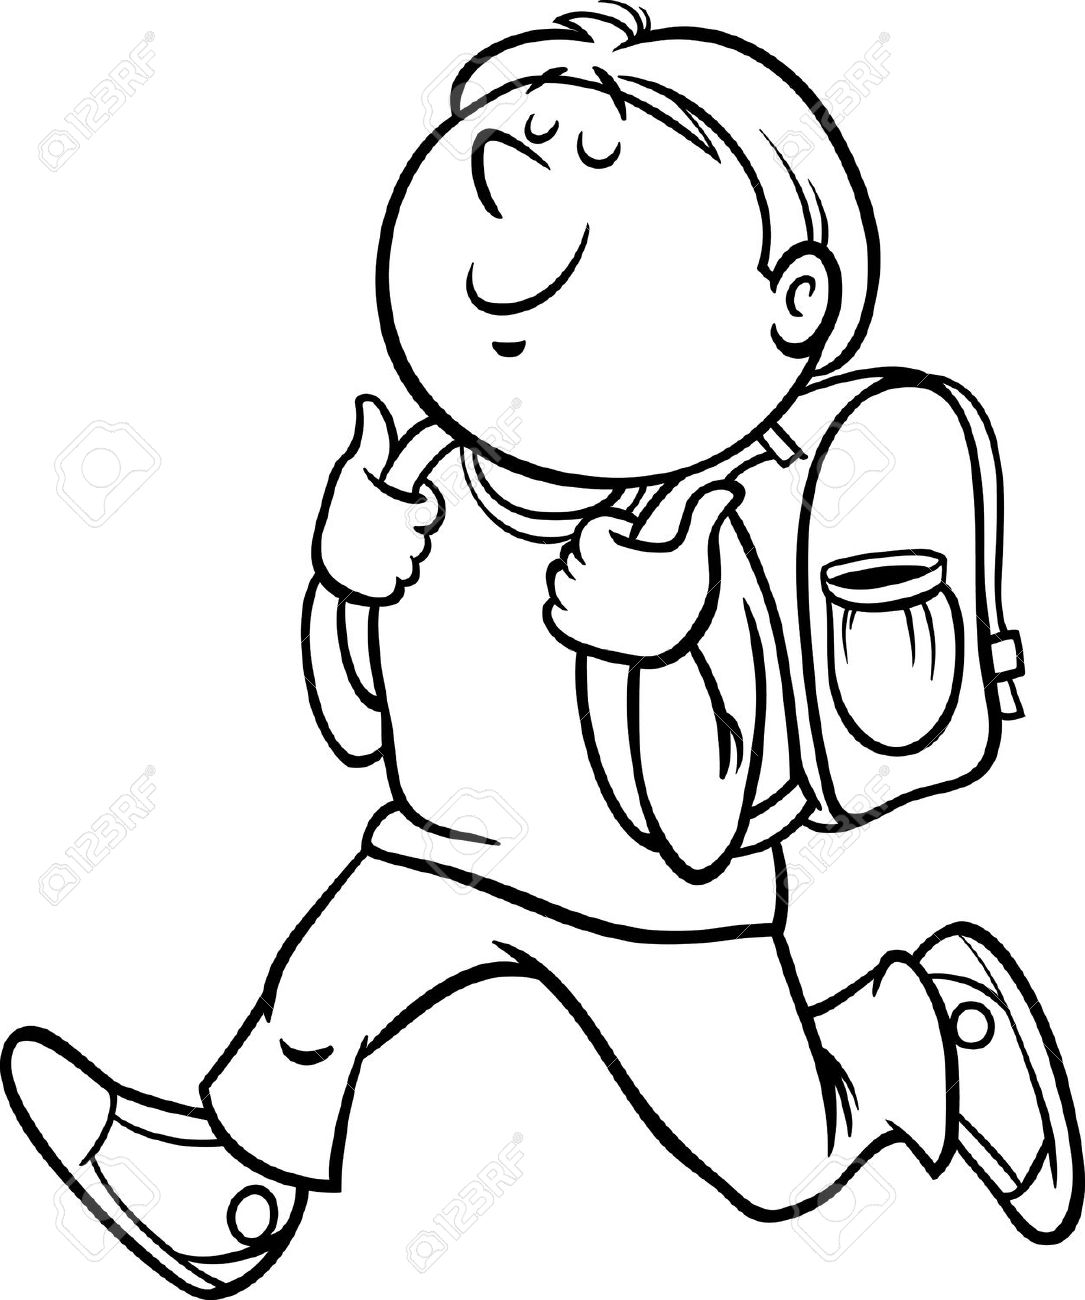 Student Clipart Black And White | Free download on ClipArtMag